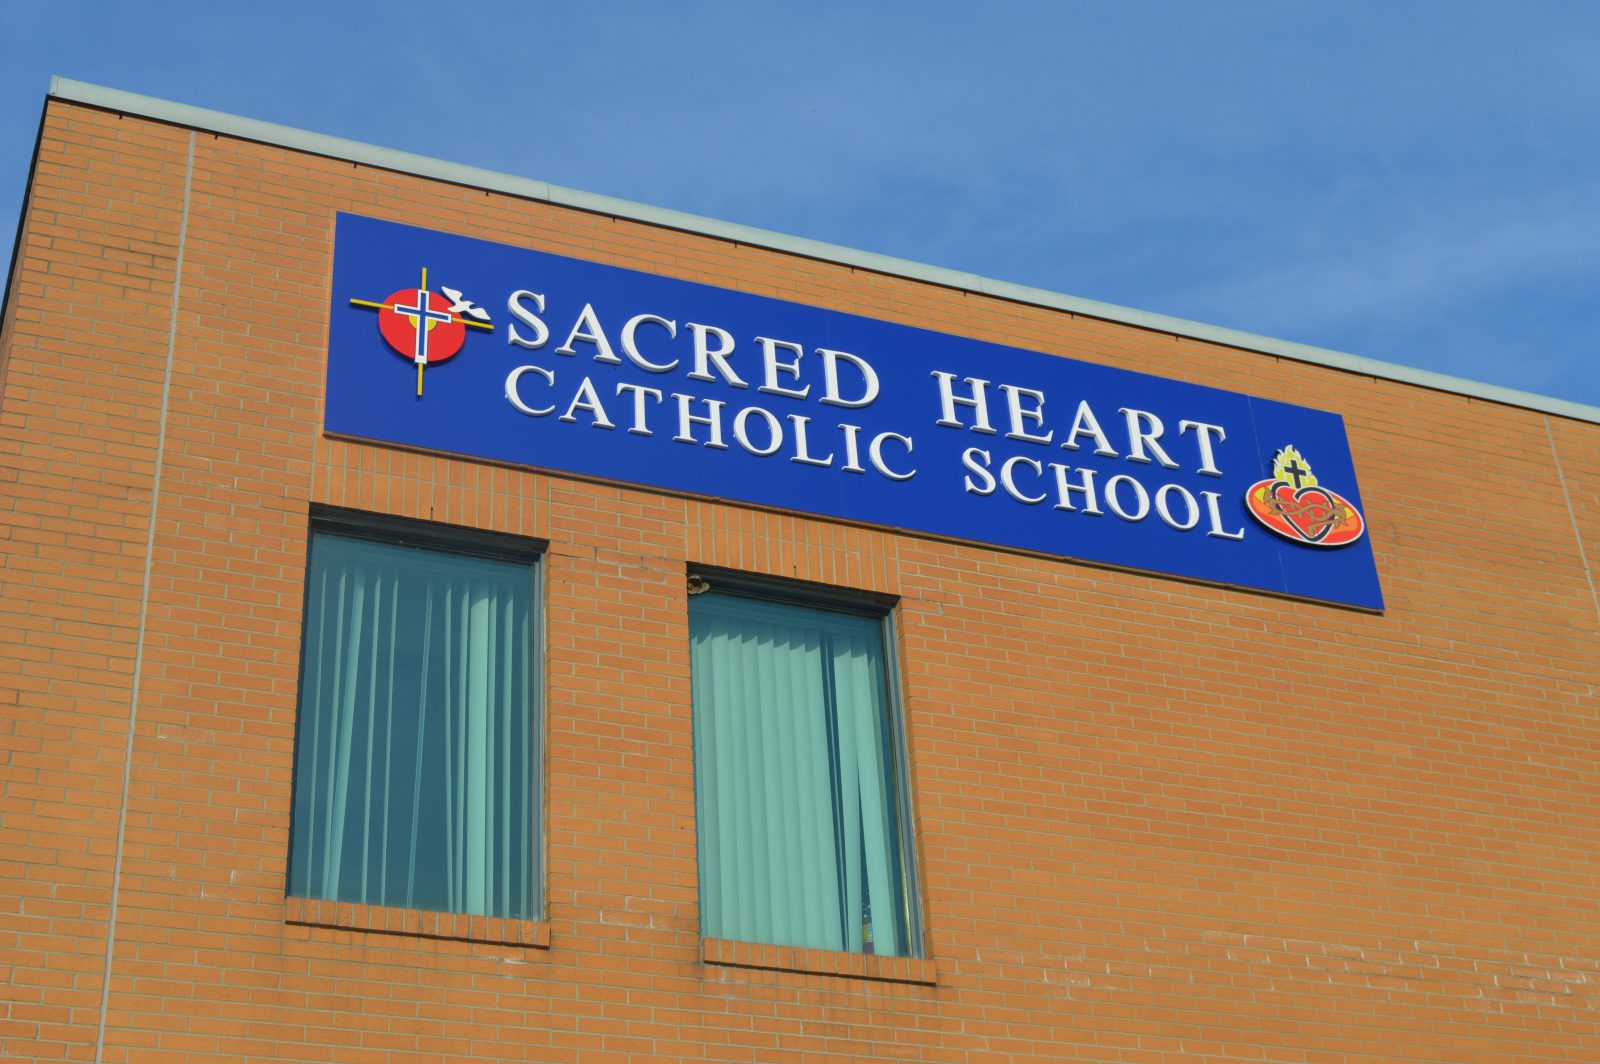 Old General Vanier becomes new Sacred Heart this fall